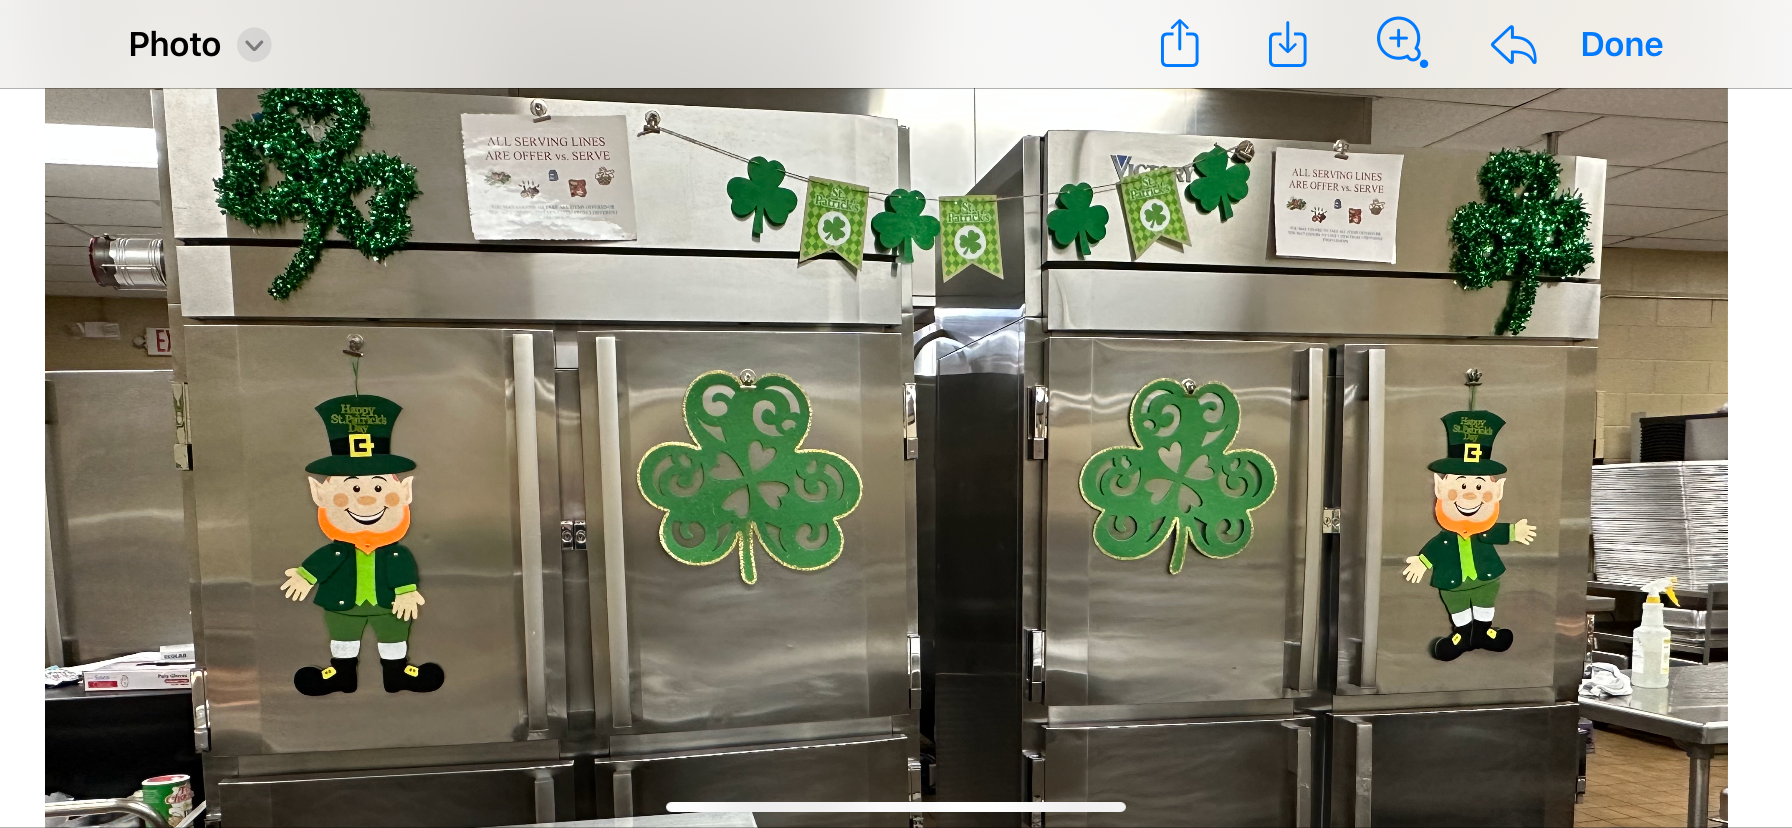 Happy St. Patrick's Day from the Elementary Cafeteria